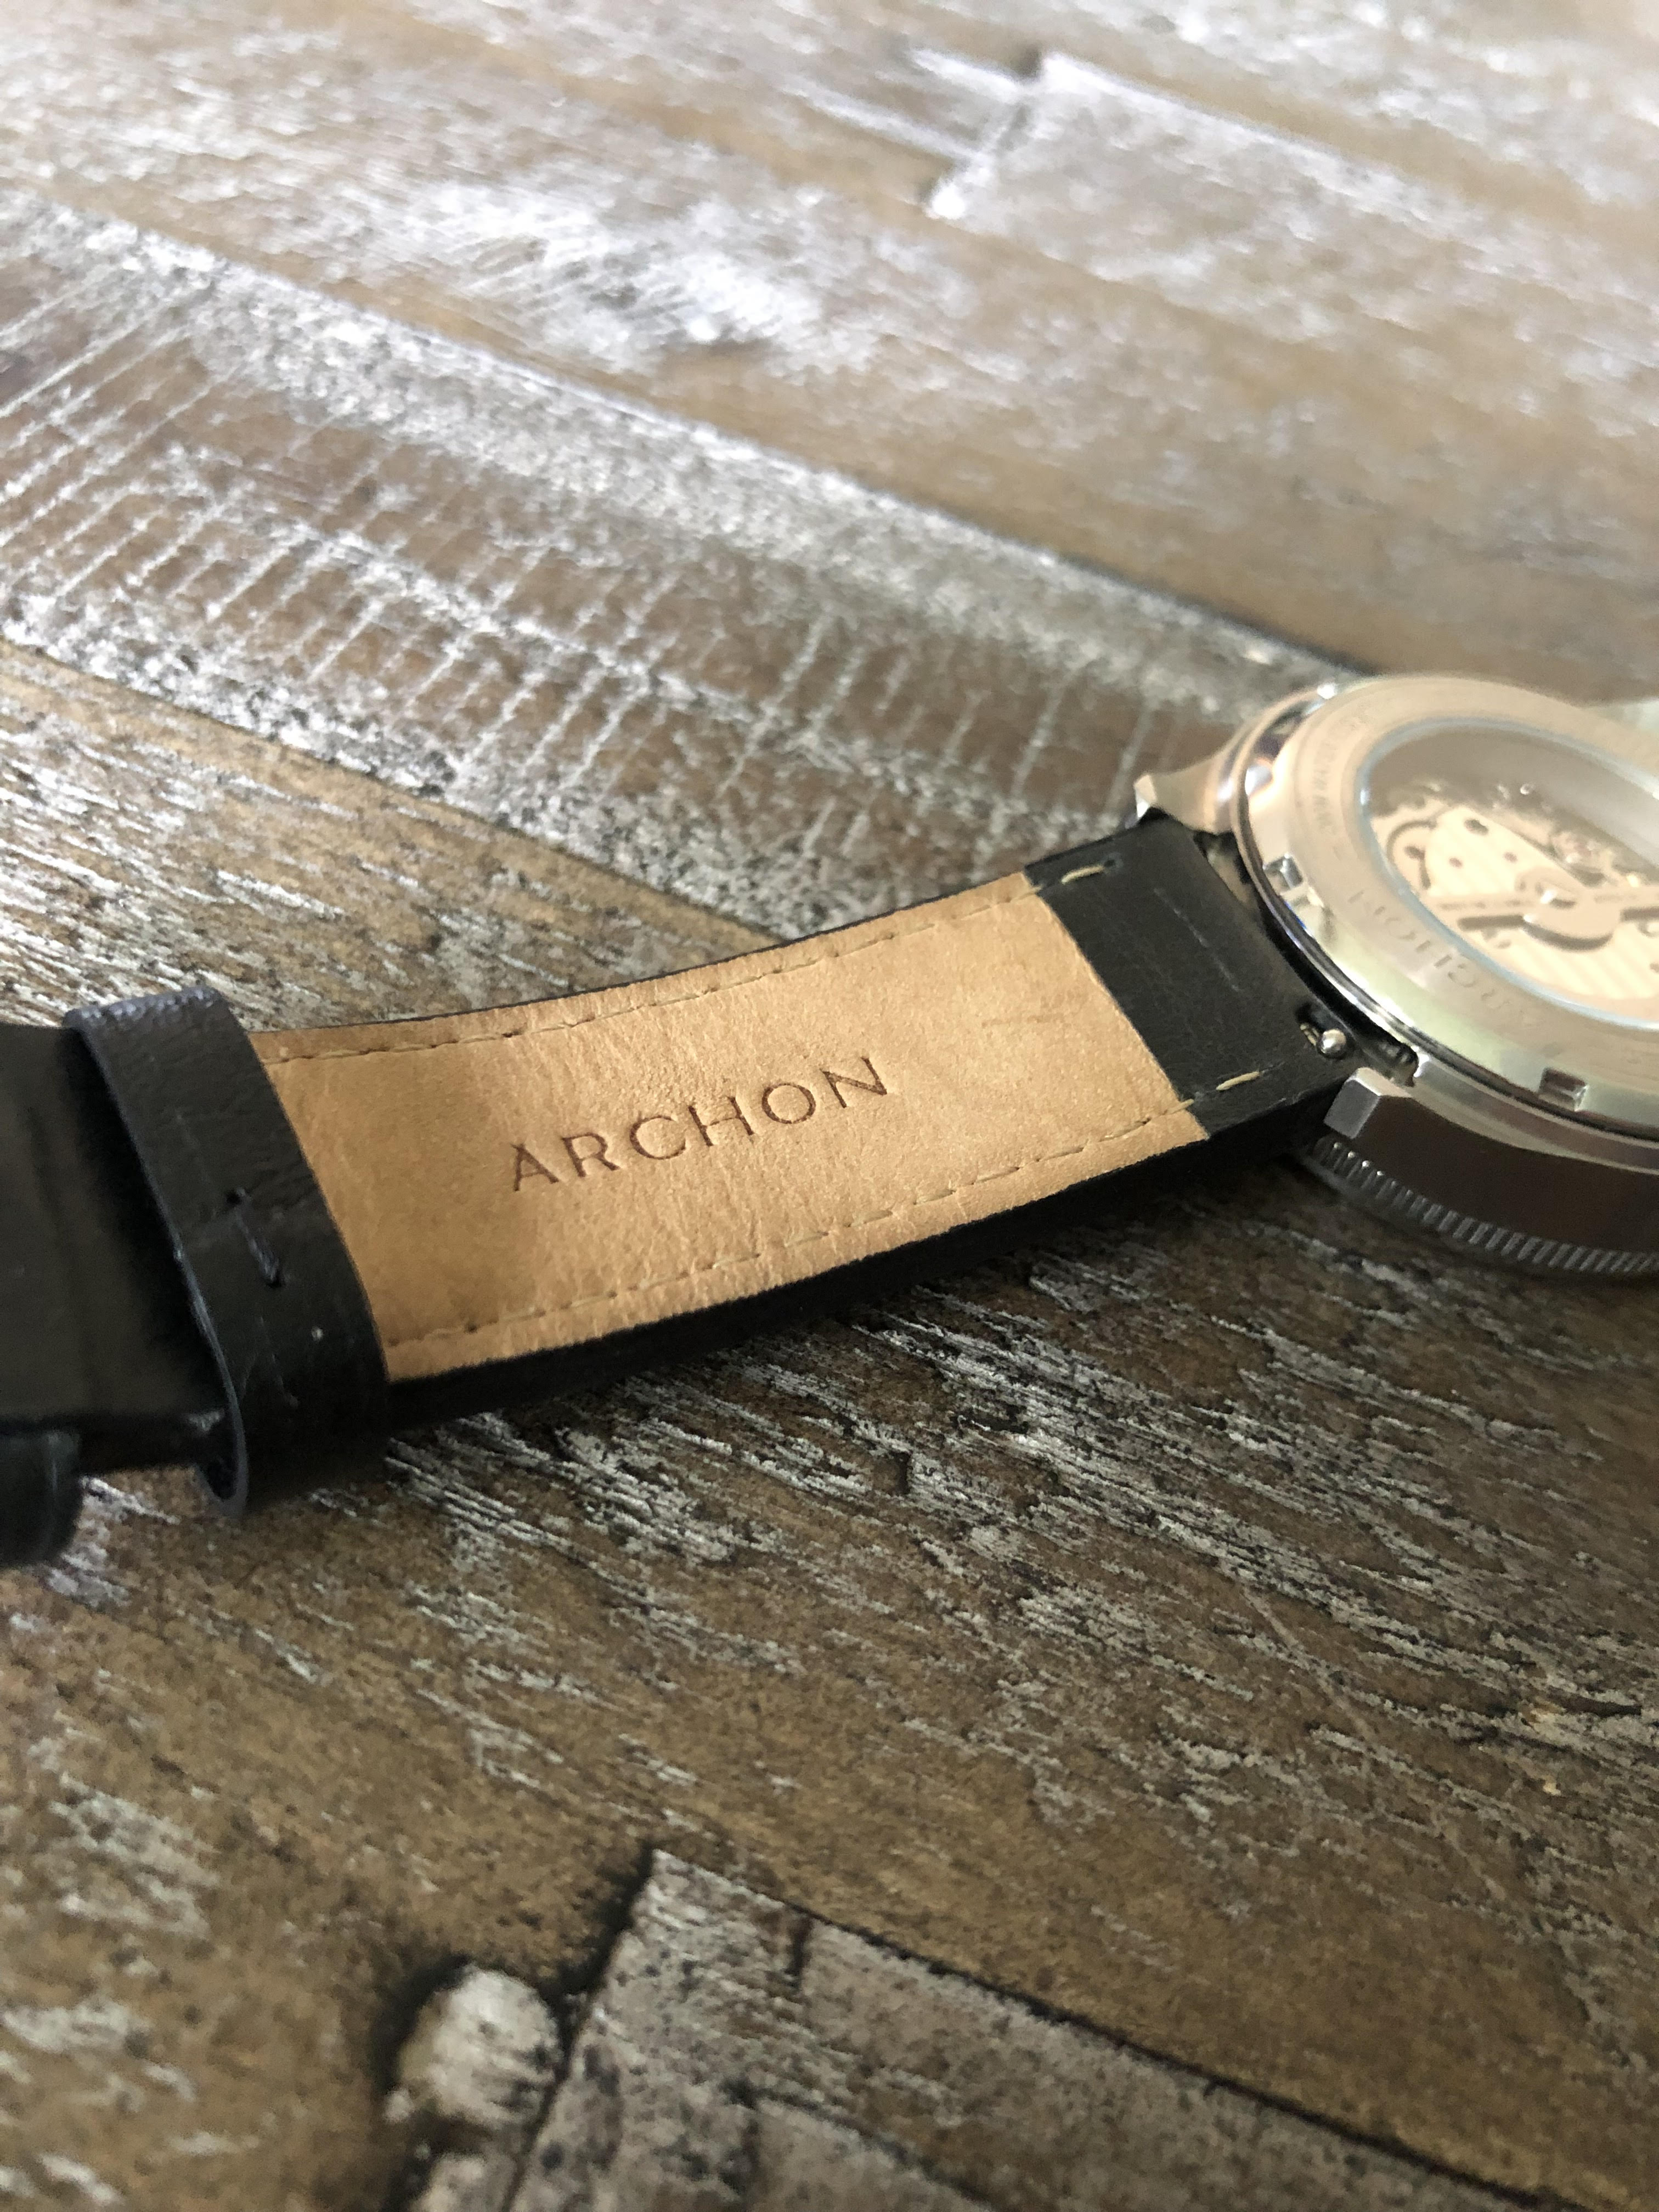 Iron Lung IL05 - Archon Watches